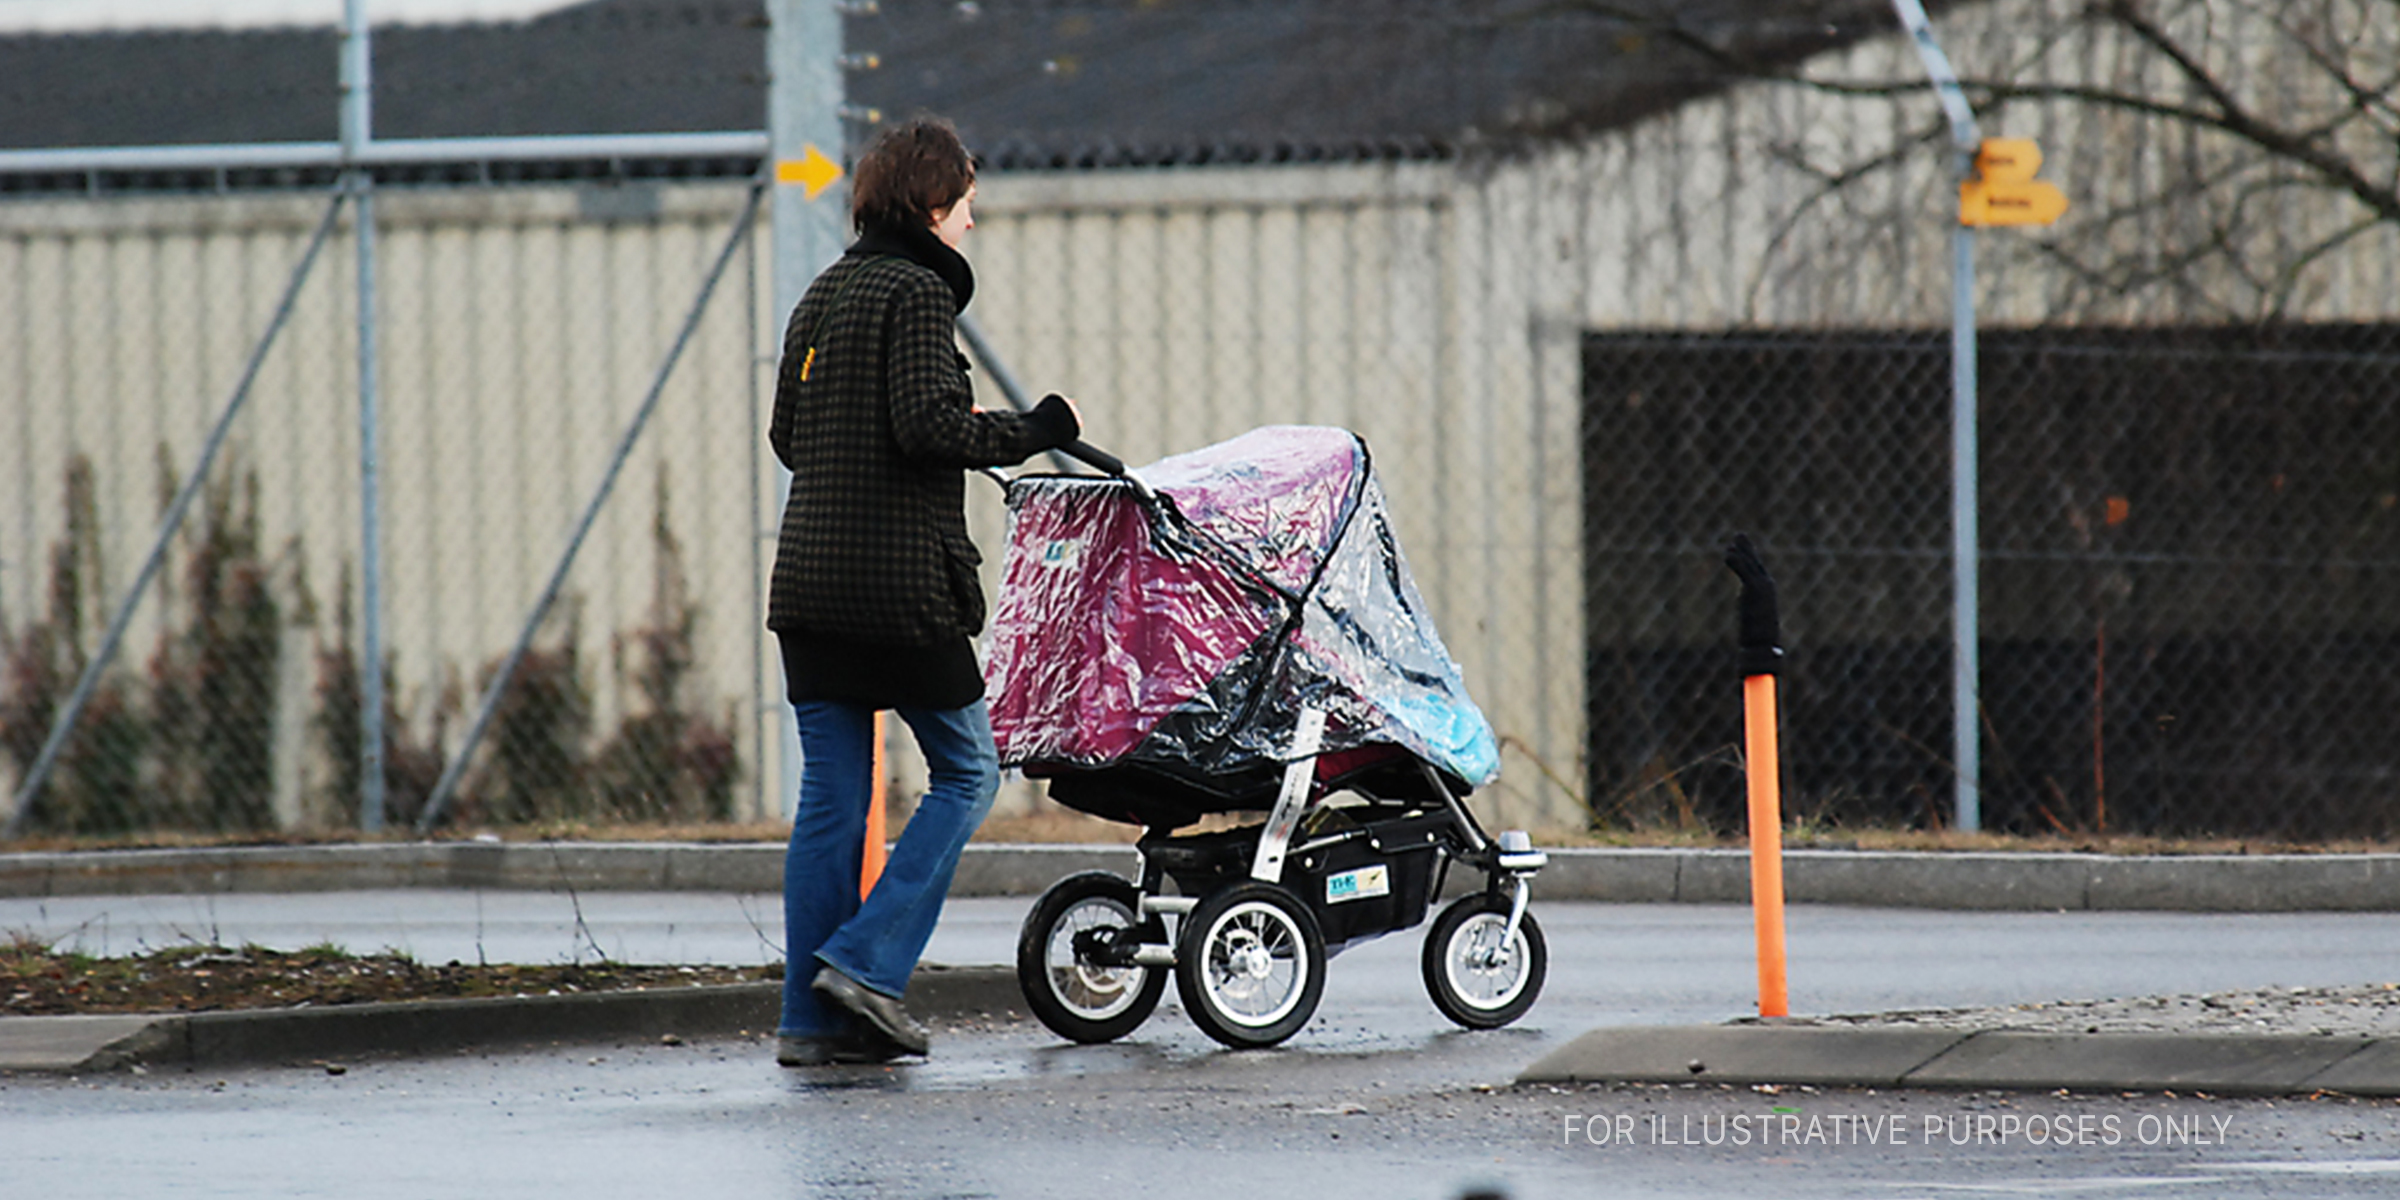 A woman pushing a stroller | Source: Flickr / vasile23 (CC BY 2.0)